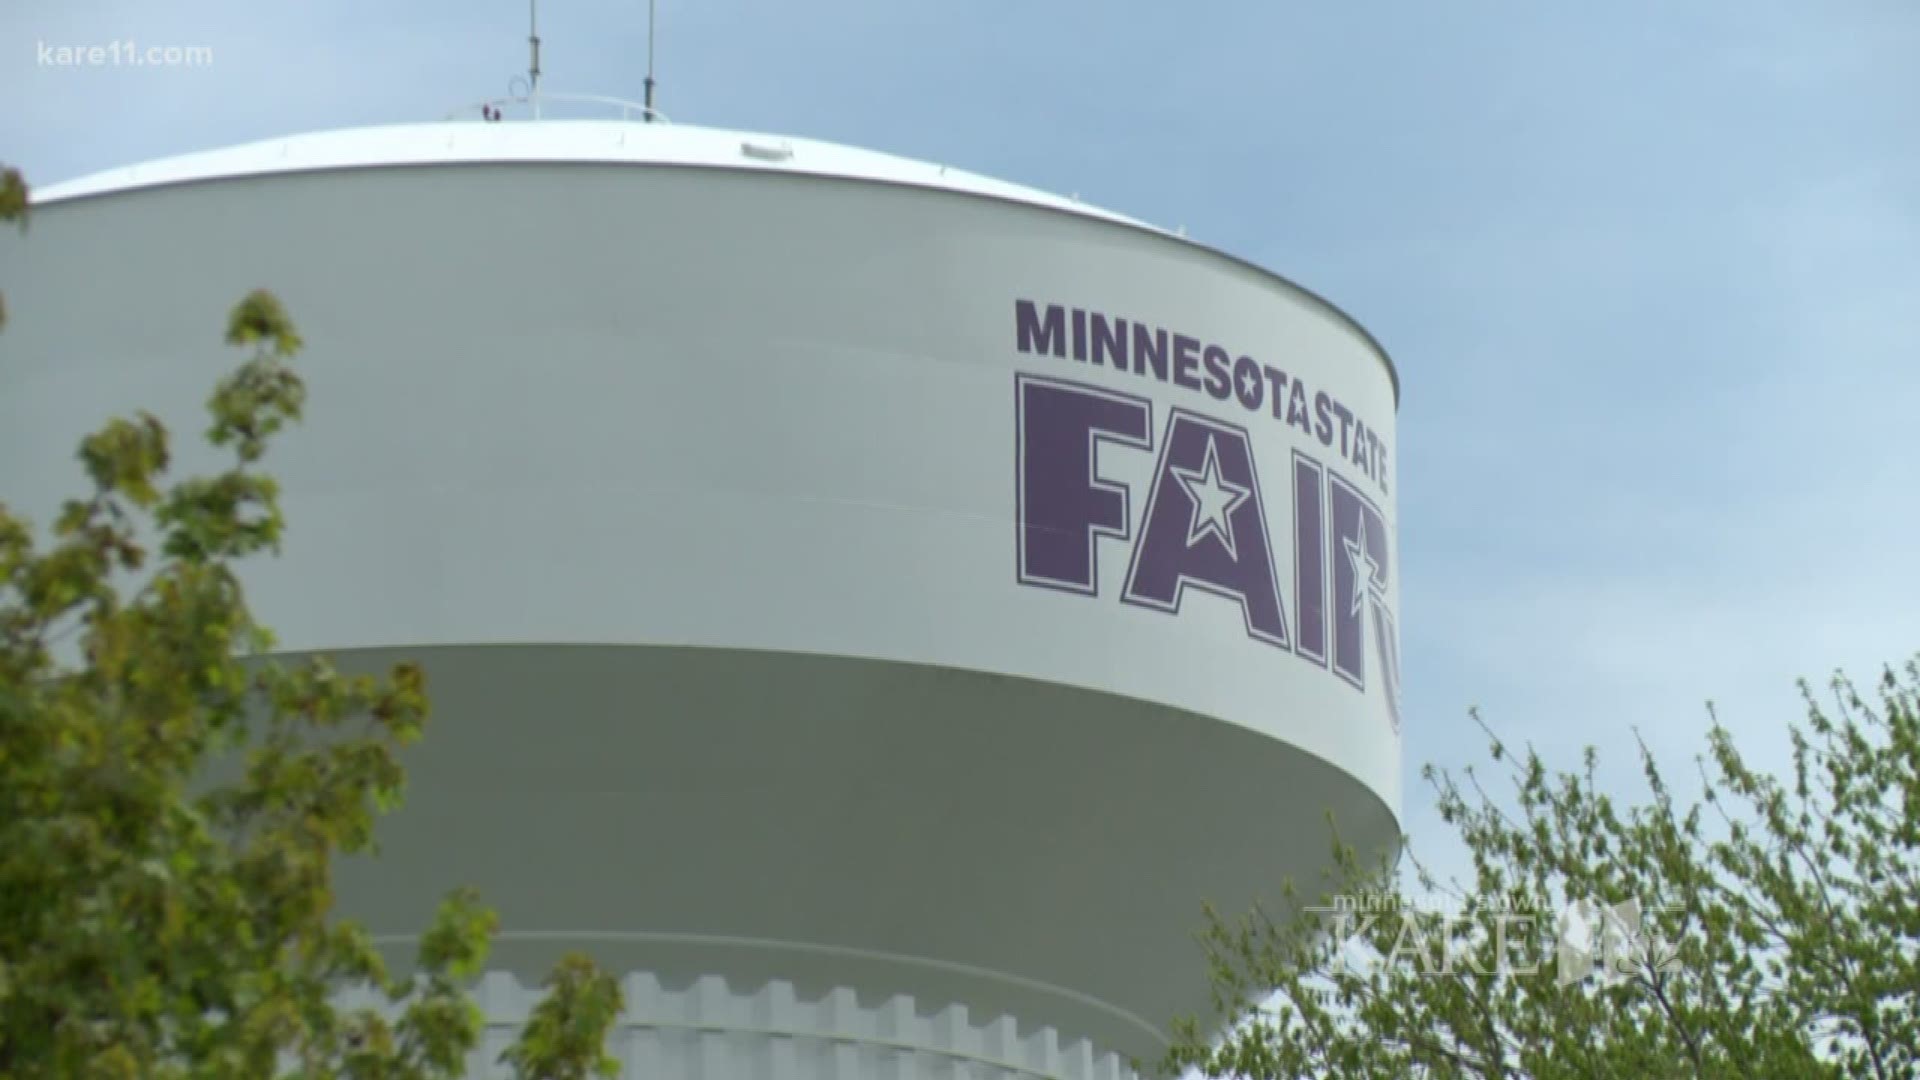 It's 100 days until the Great Minnesota Get Together and the fairgrounds are busy with preparations.